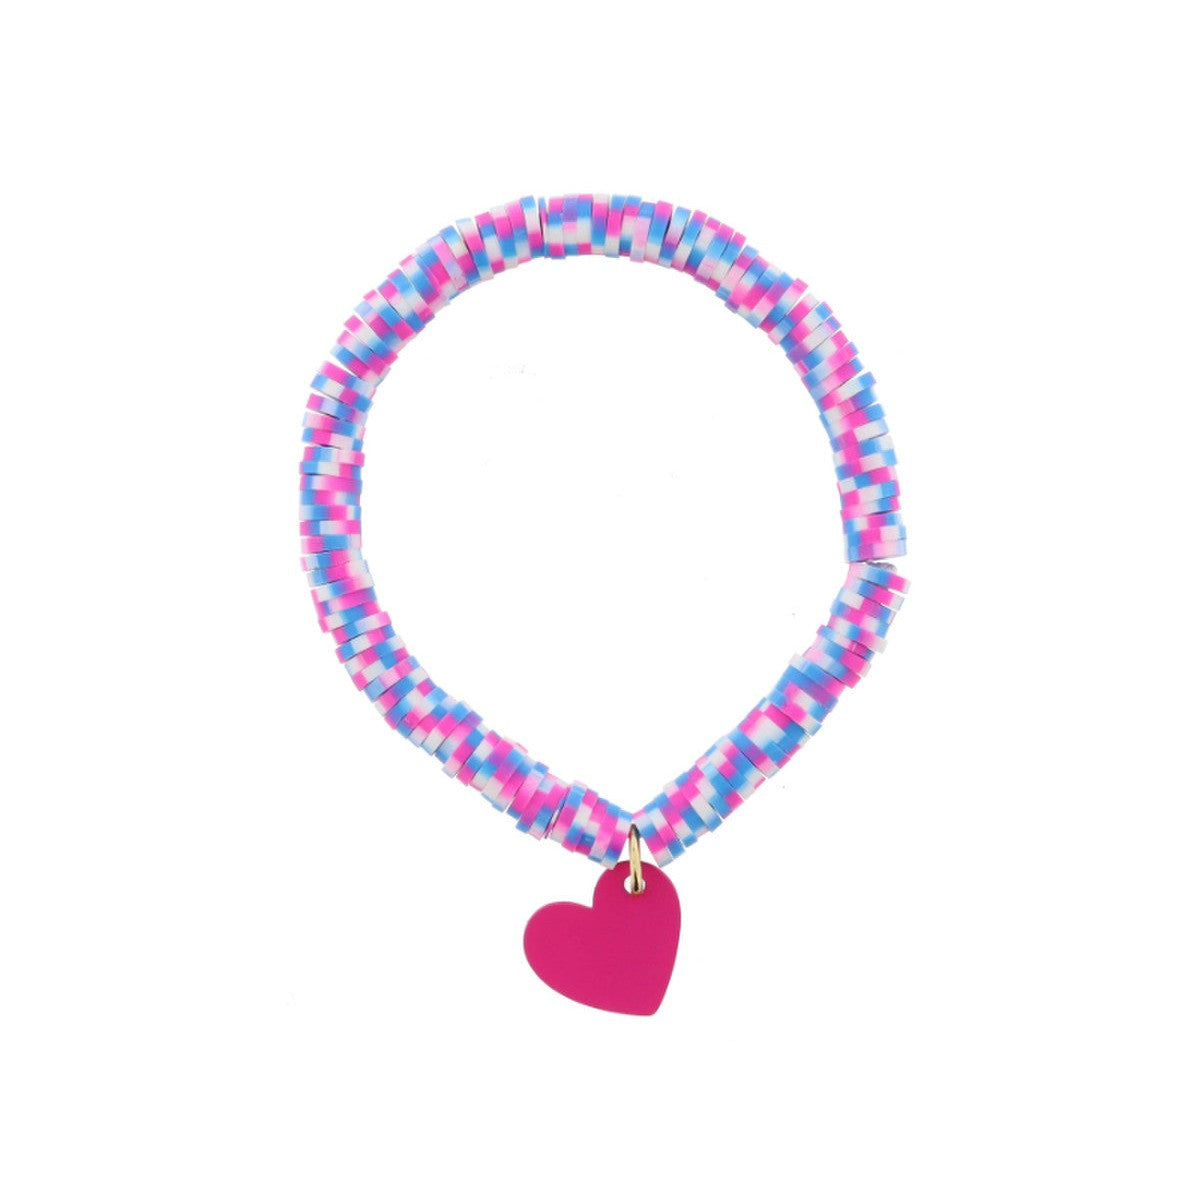 Jane Marie Kids Hot Pink, Blue, White Speckled Rubber Sequin Beaded With Hot Pink Heart Bracelet-JANE MARIE-Little Giant Kidz